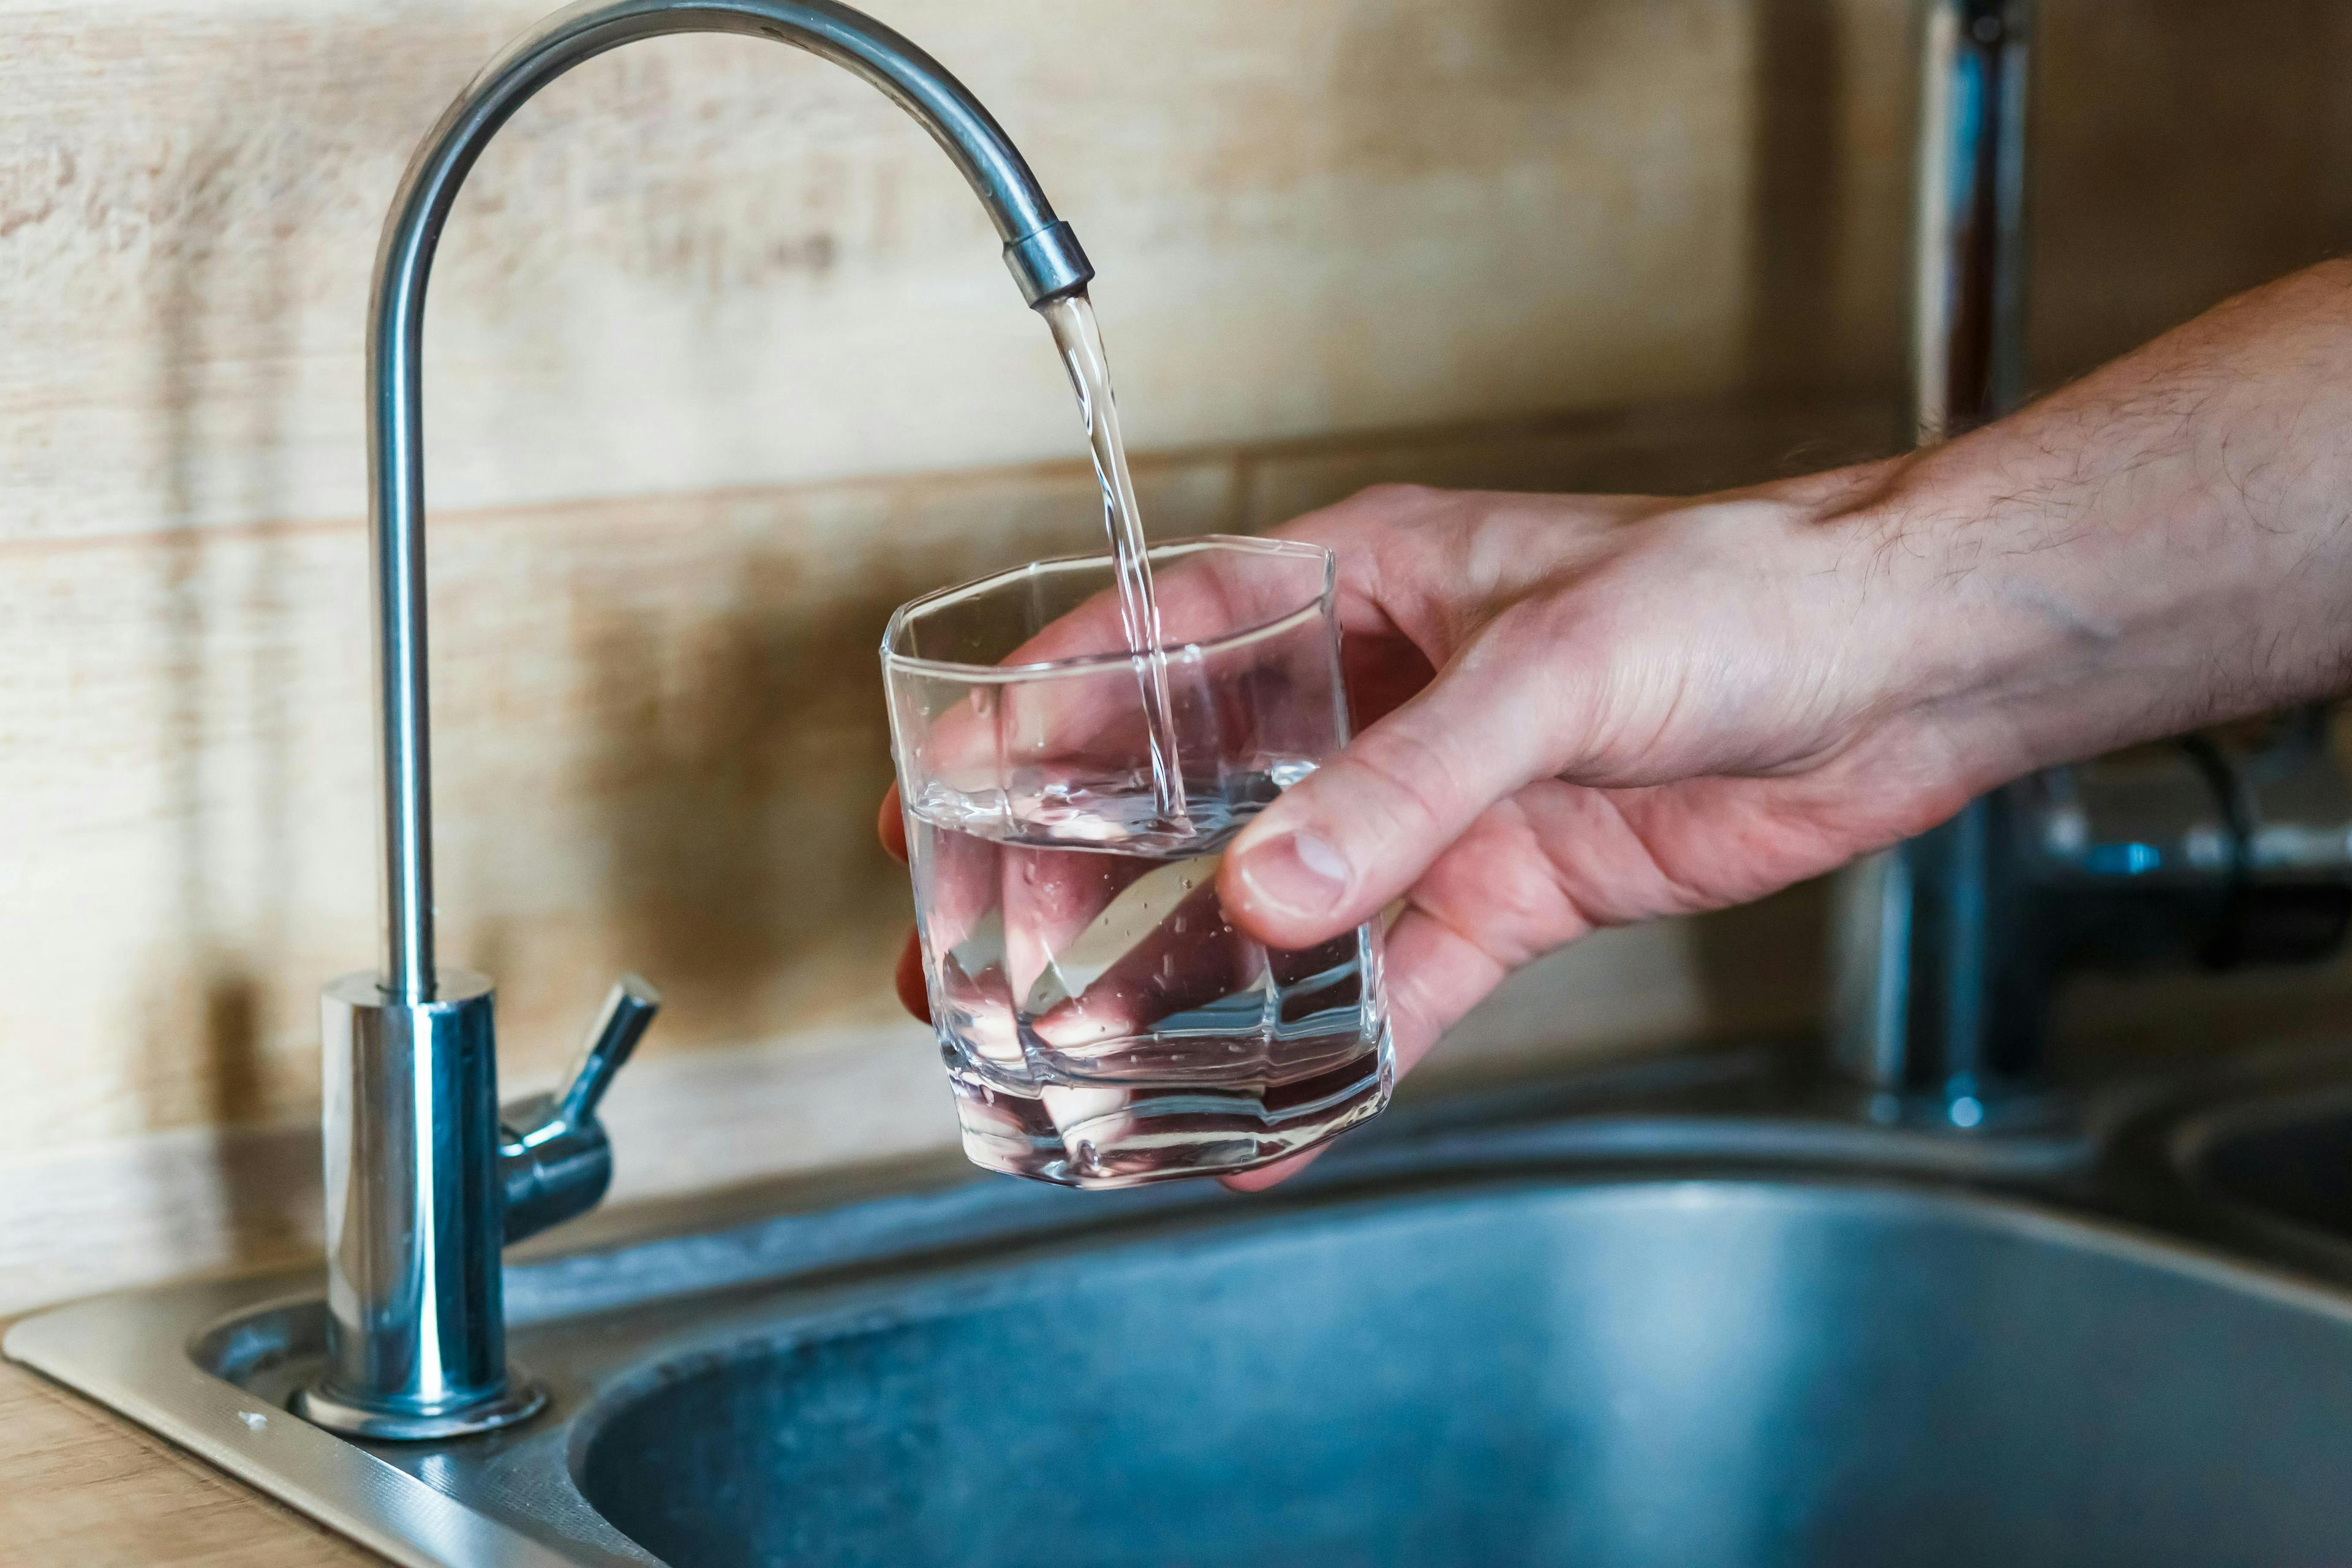 How to Check Your Water Quality Report by ZIP Code